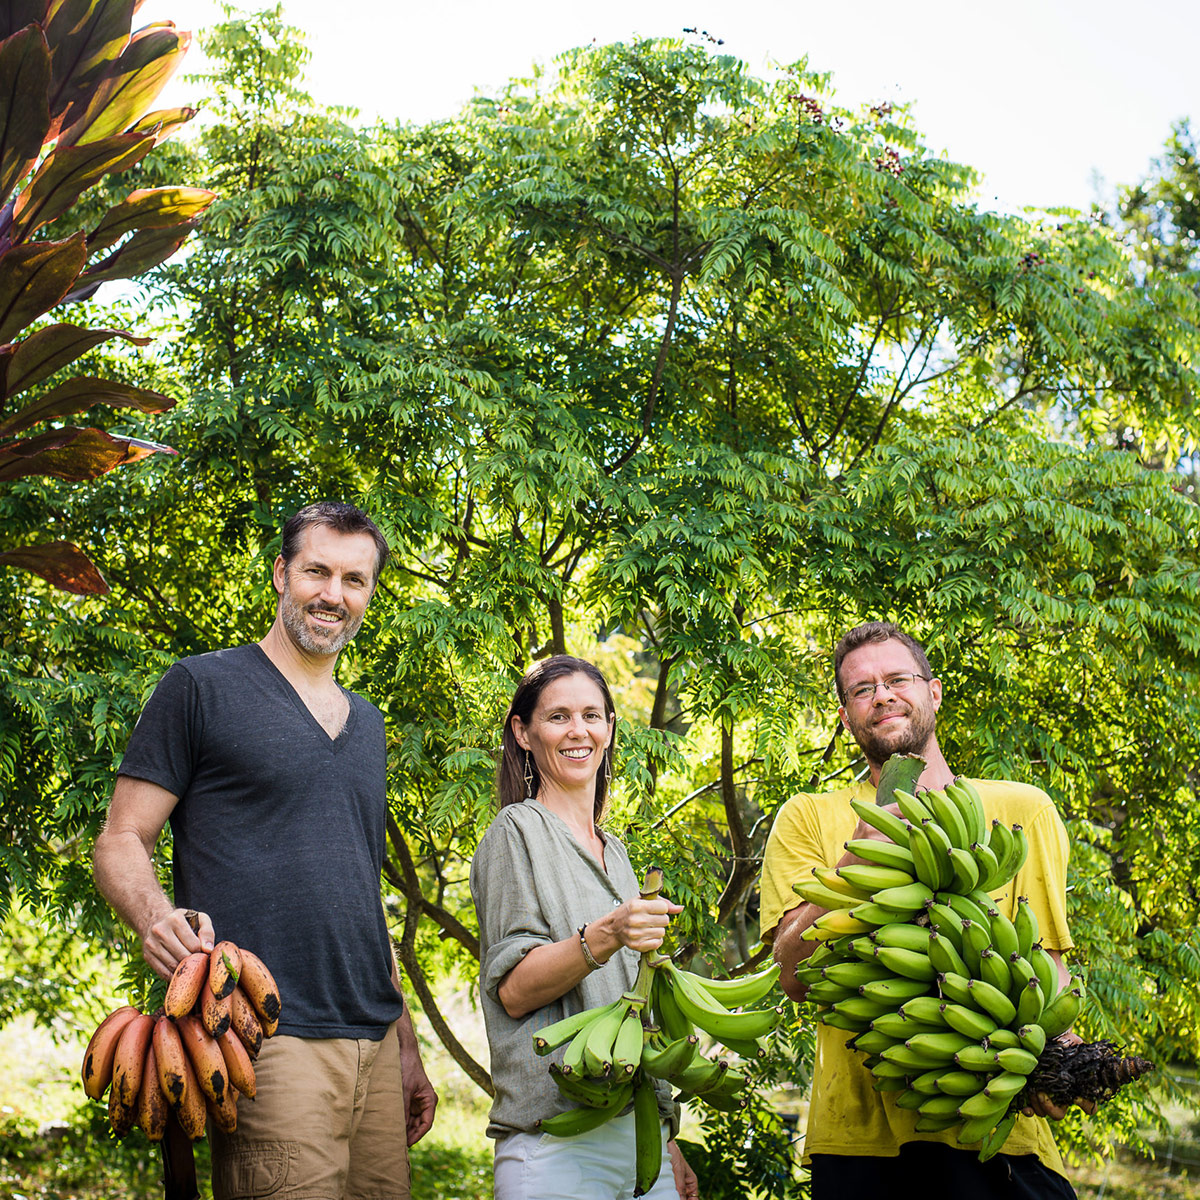 Posing with some of the bananas recollected at Honaunau Farm